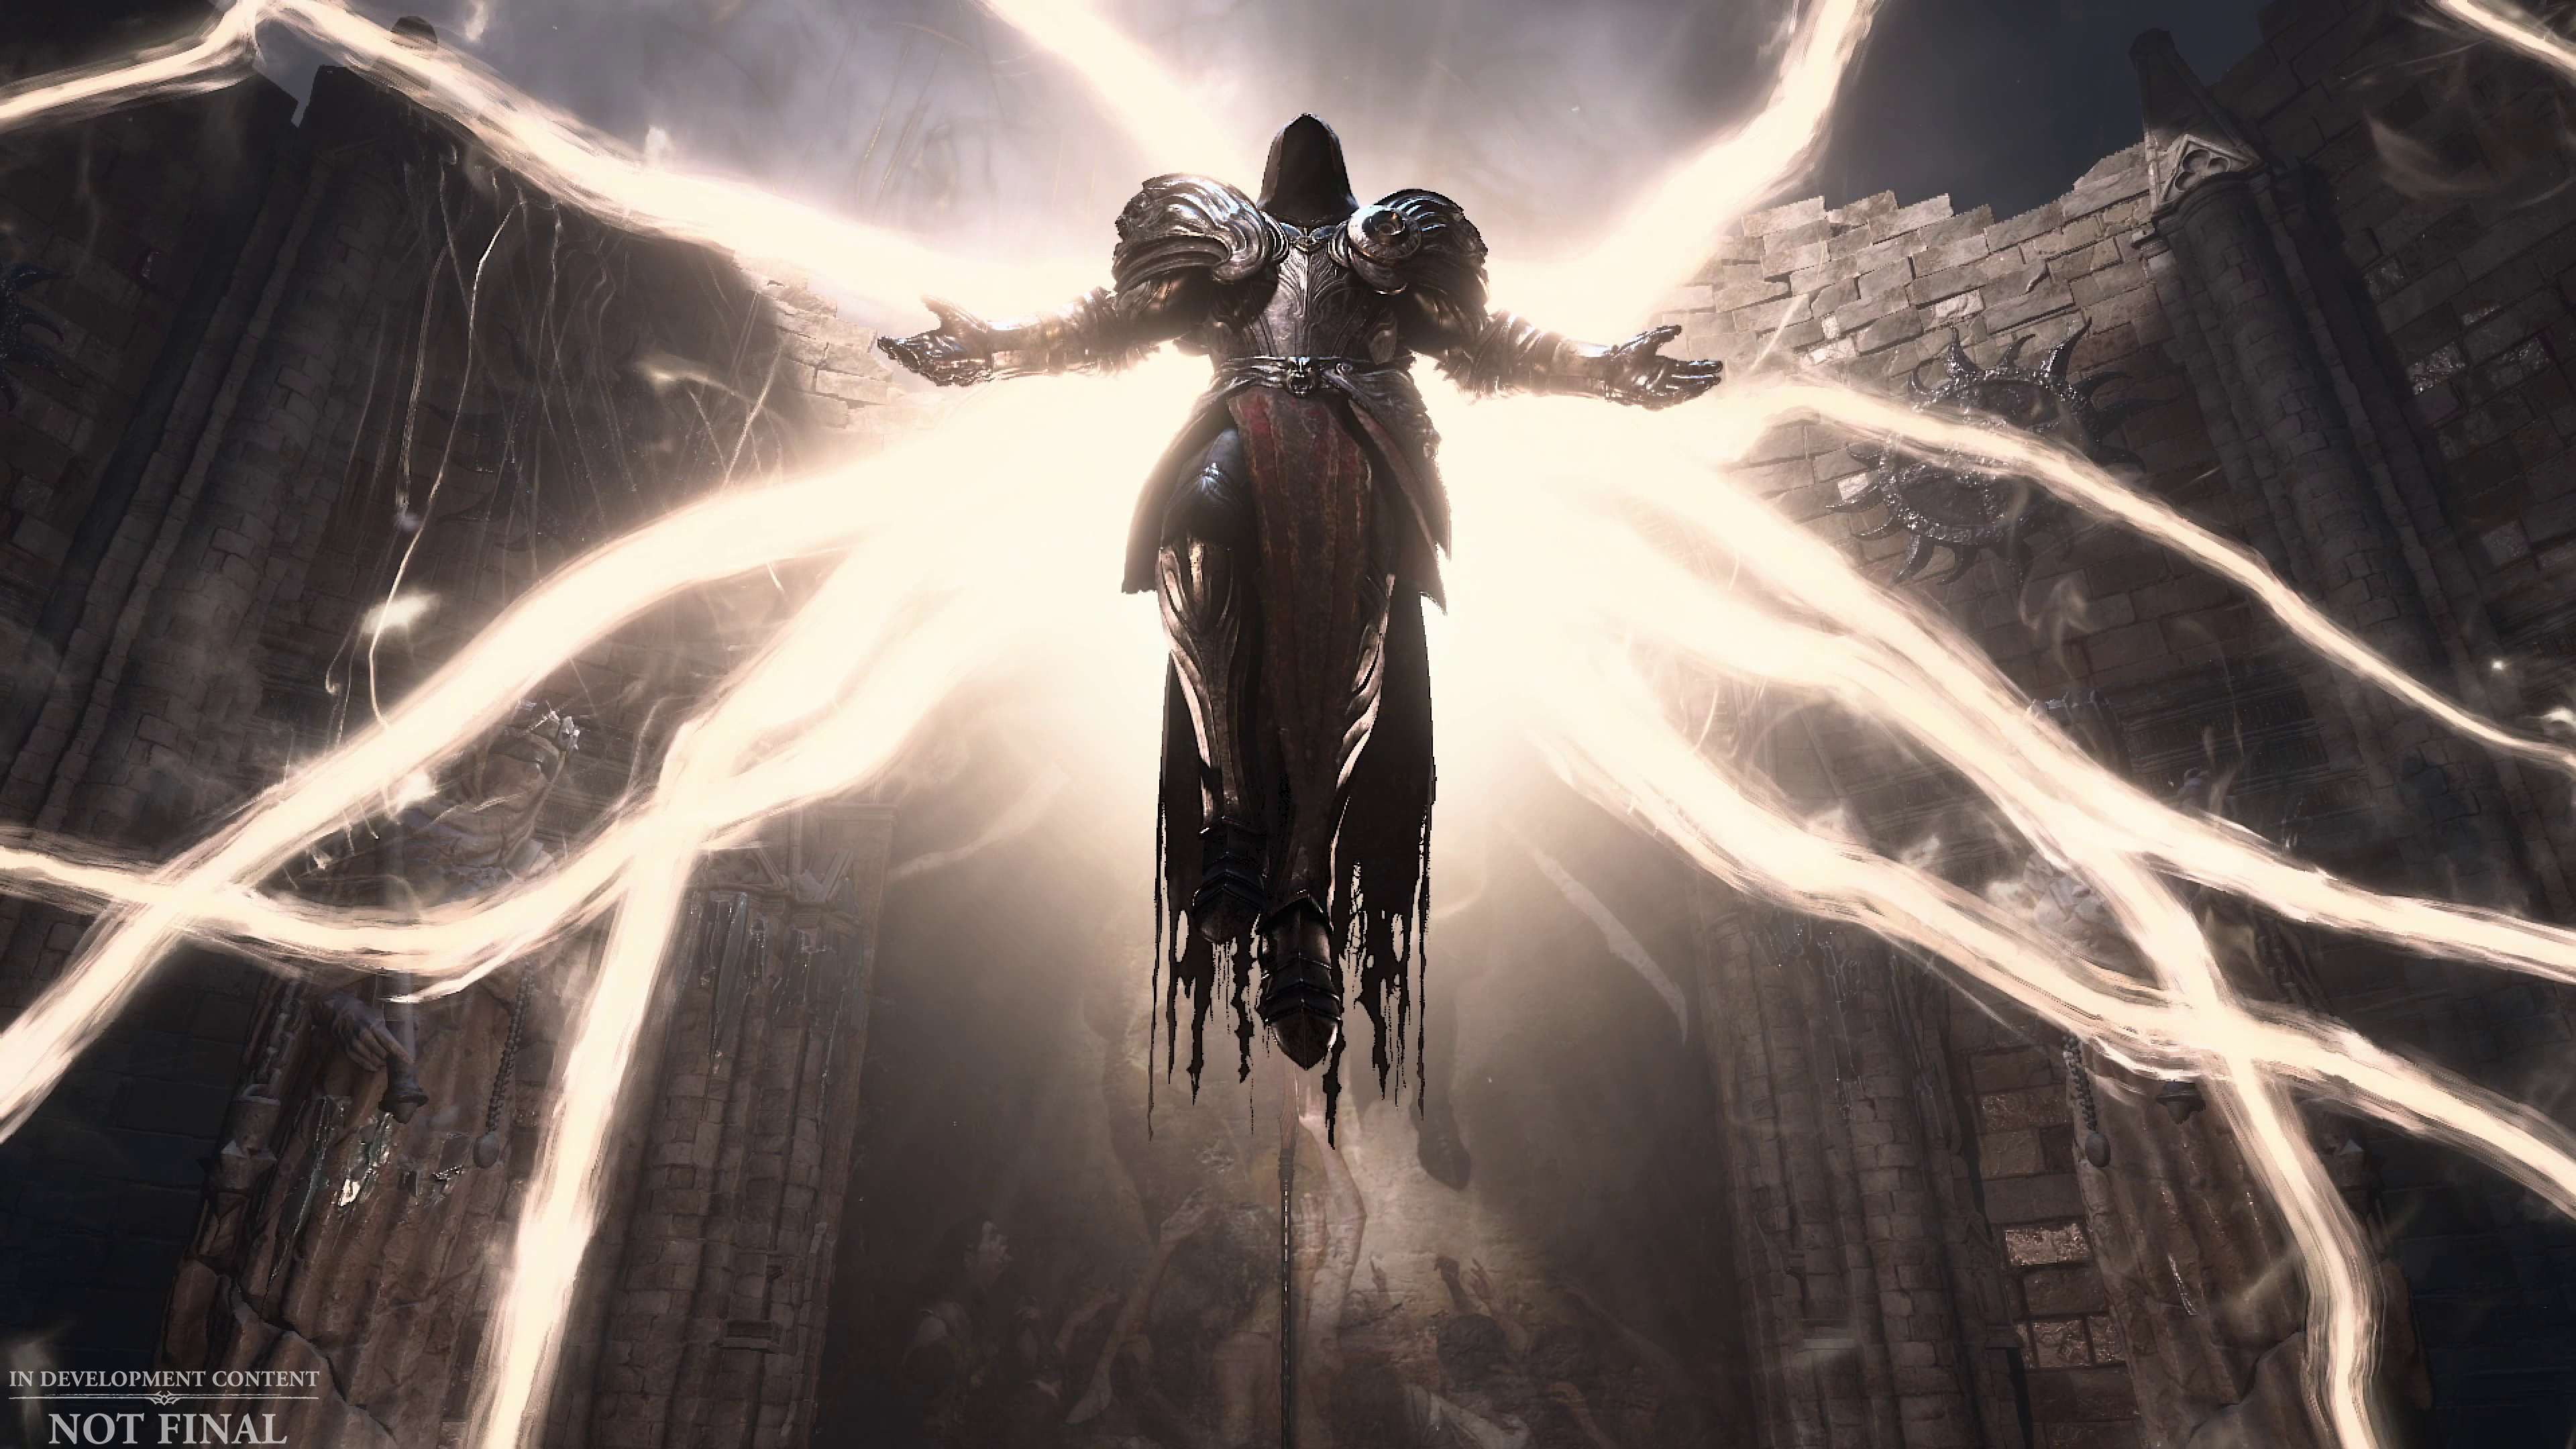 Inarius, an angel with golden wings of light, descends from the sky to speak in Diablo 4